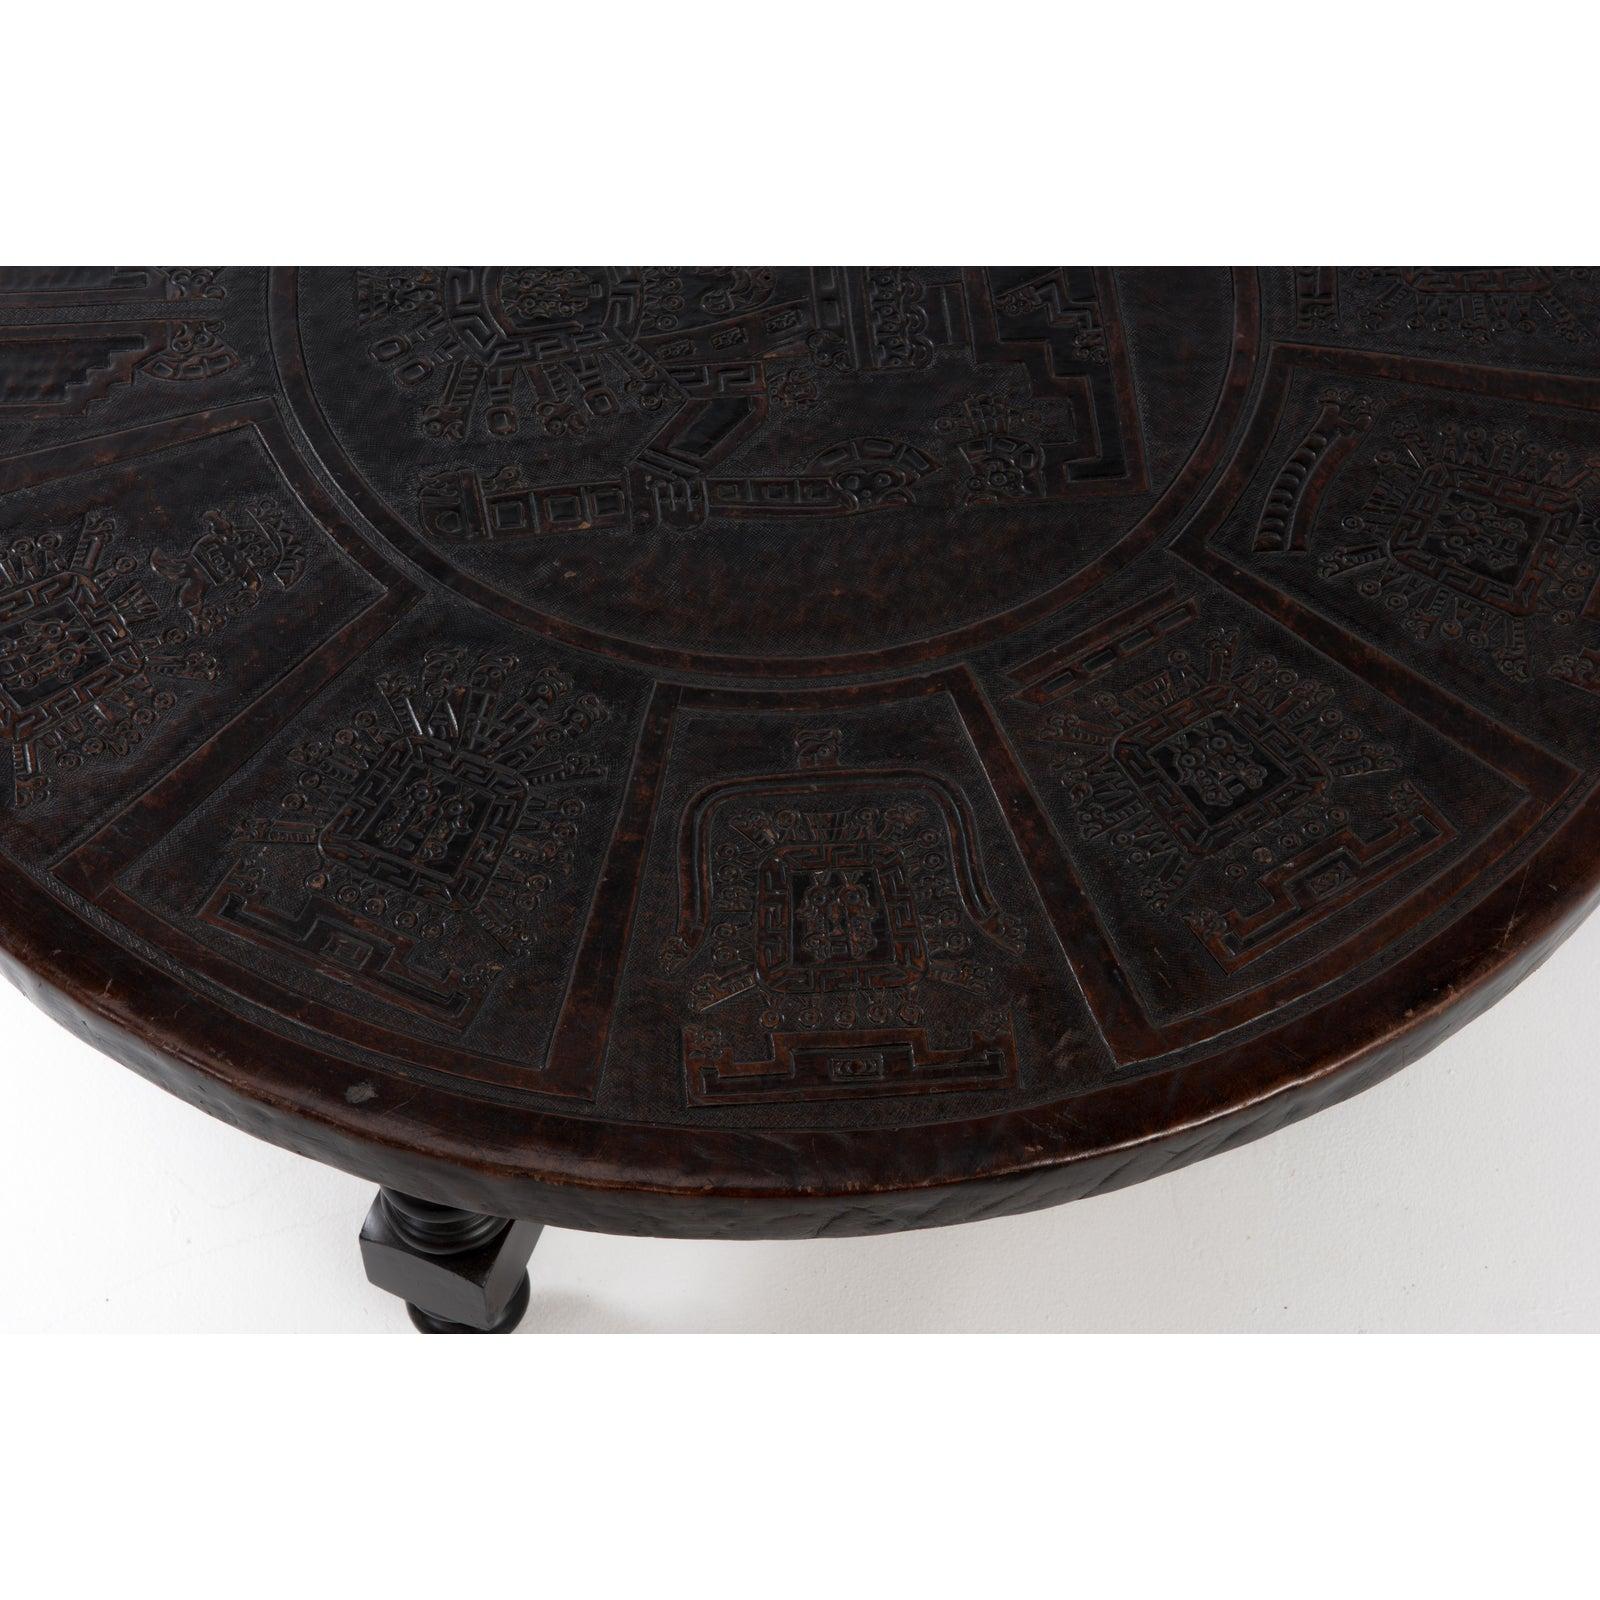 Late 20th Century Angel I. Pazmin Round Mid-Century Modern Leather and Wood Coffee Table